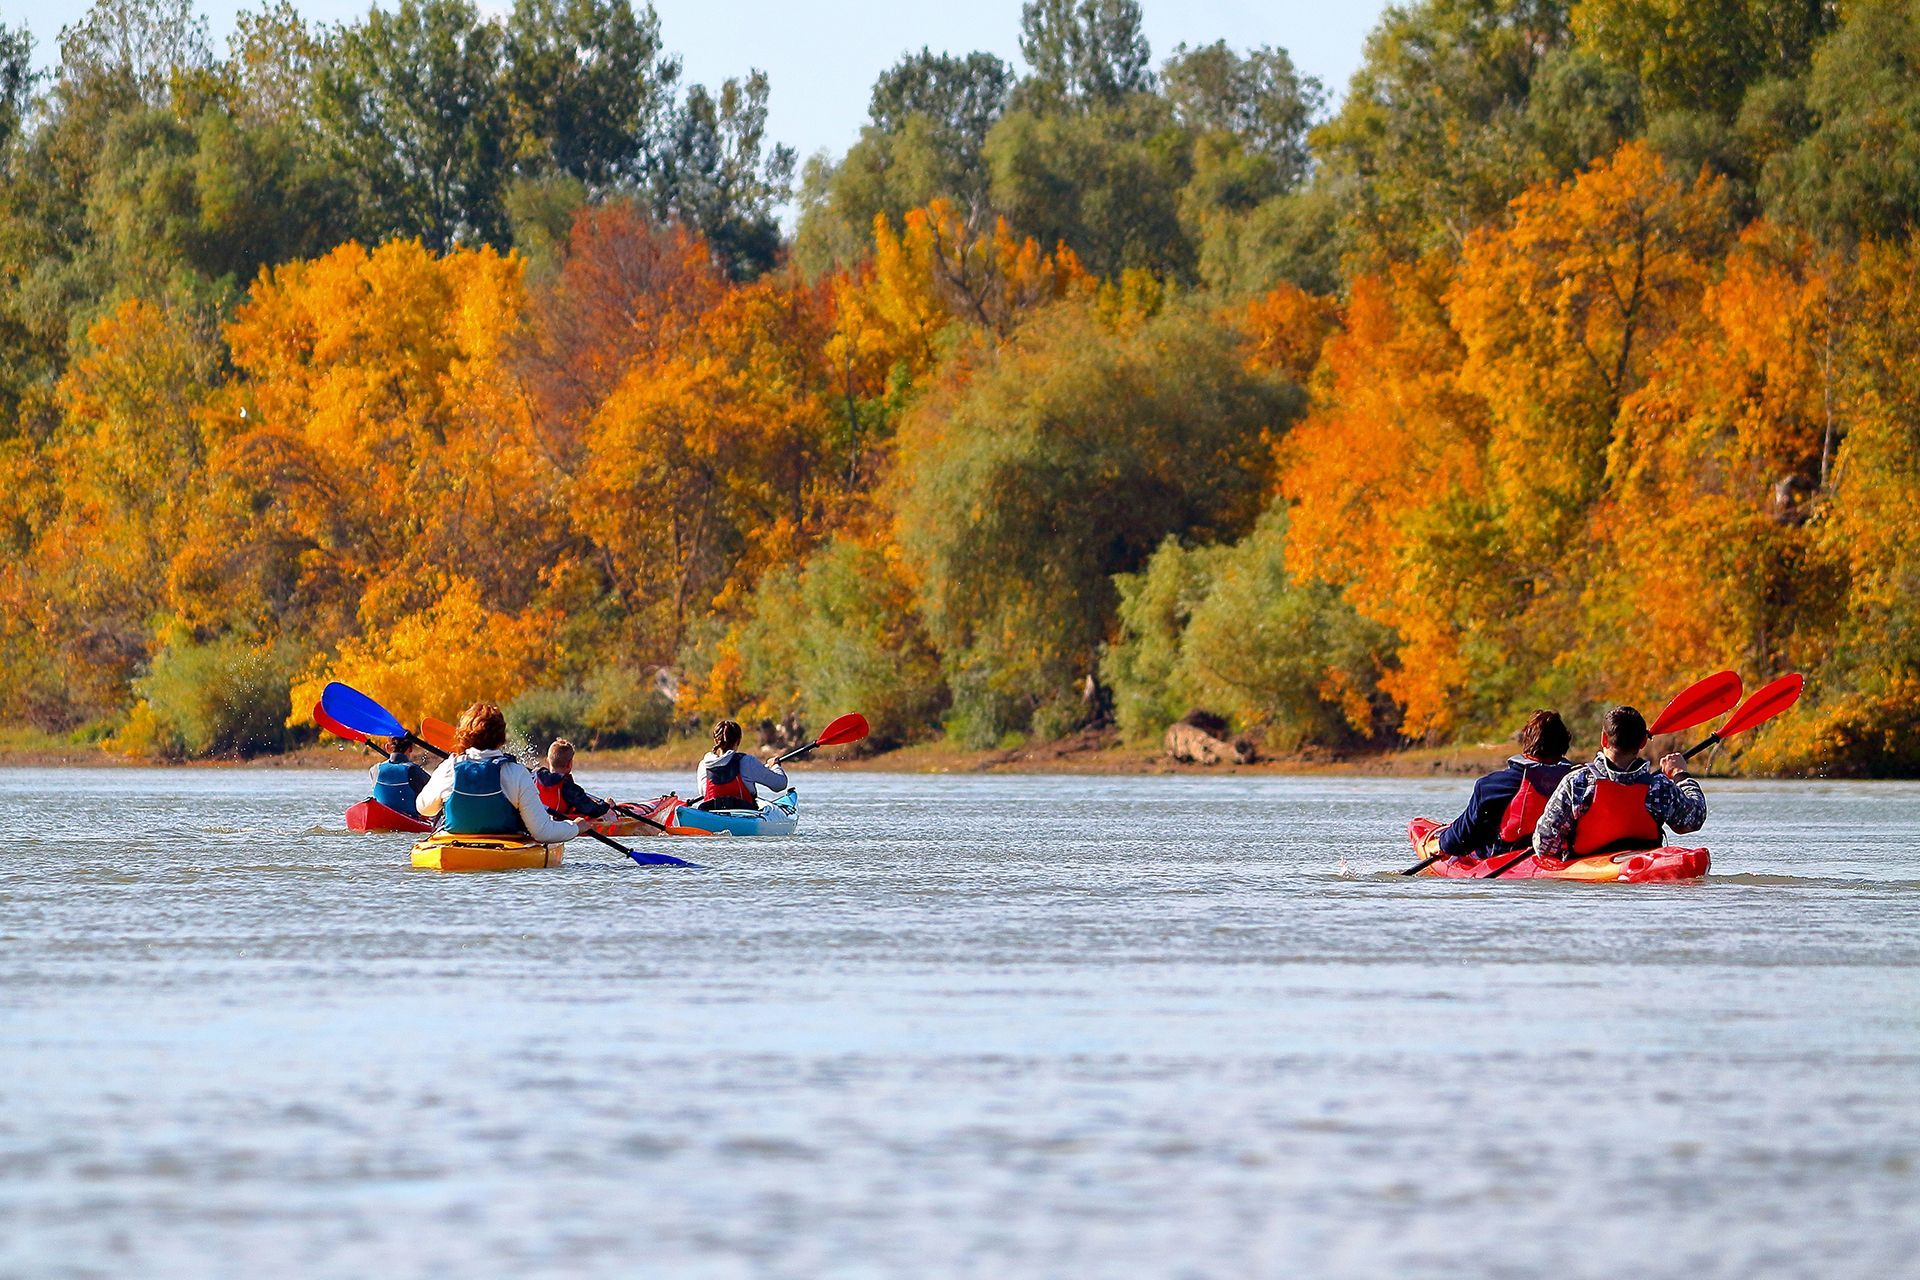 A group of people are kayaking down a river.